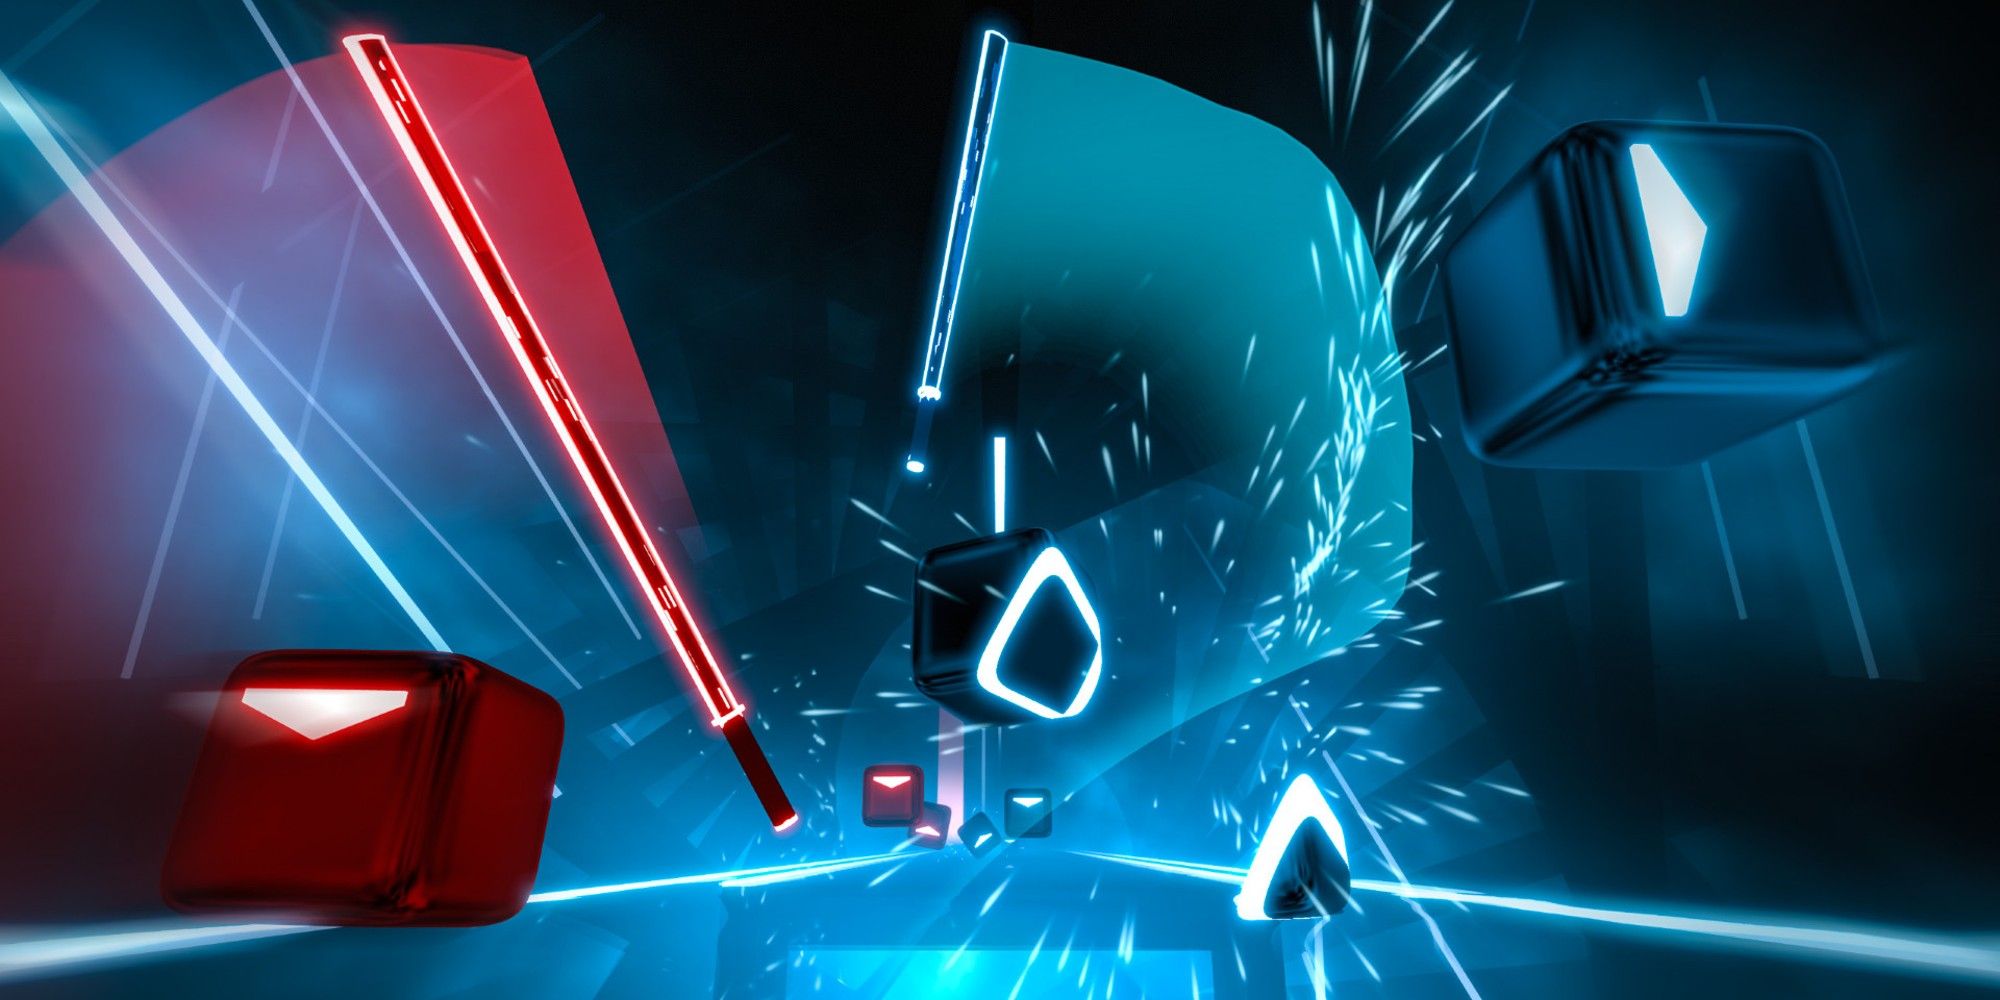 first person view of a Beat Saber player slashing through oncoming blocks